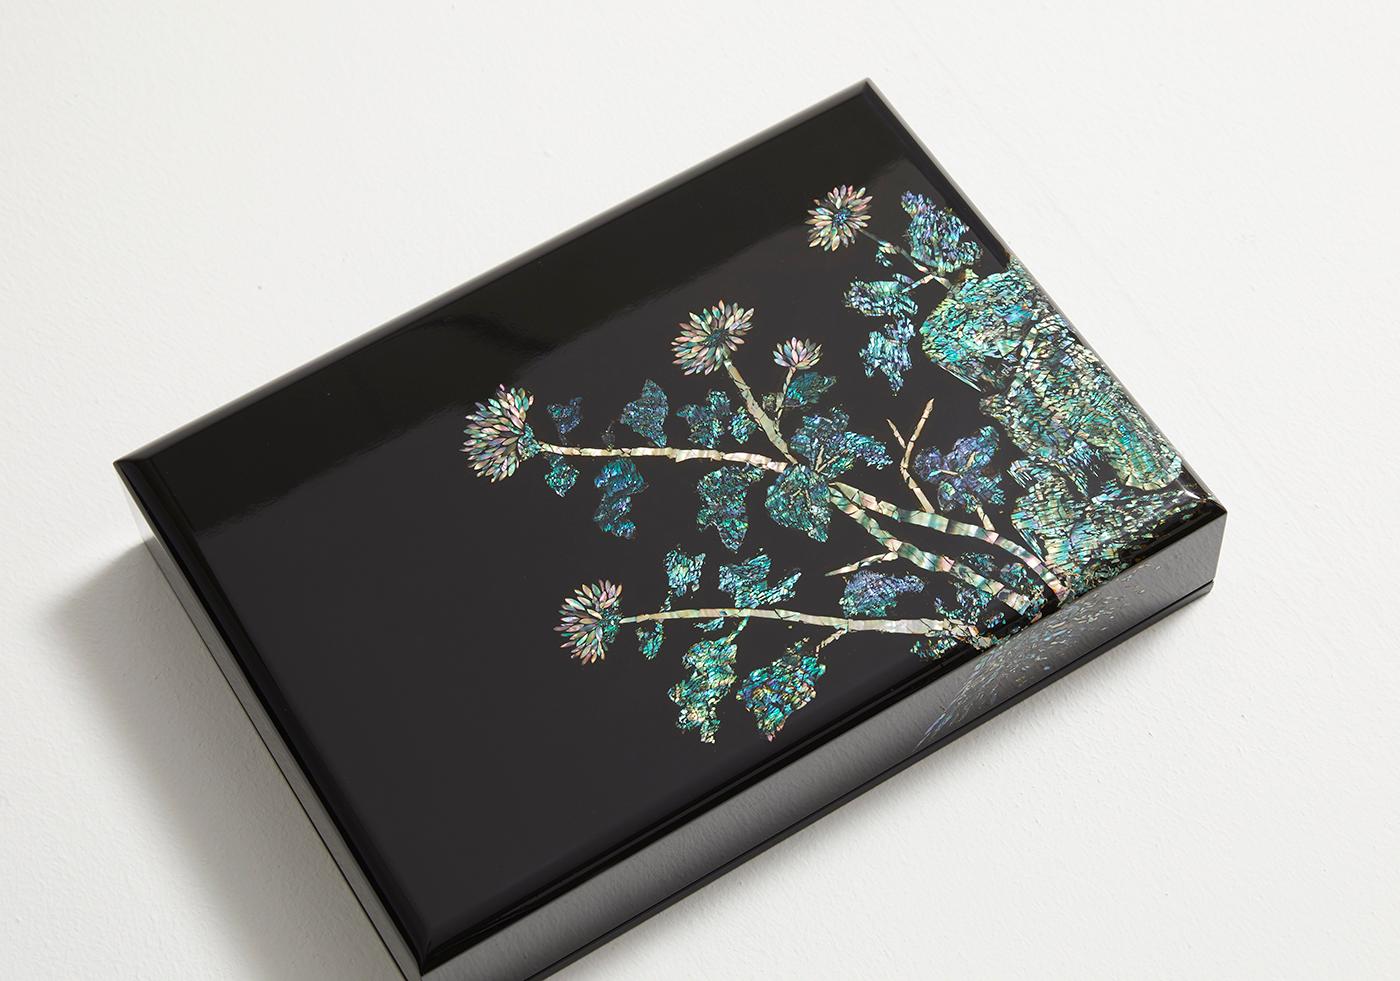 This artwork applied the method of striking and scouring to the carefully selected pieces of the iridescent mother of pearl, to create a wooden box depicting chrysanthemum flowers, one of the four gracious plants symbolizing strong integrity and